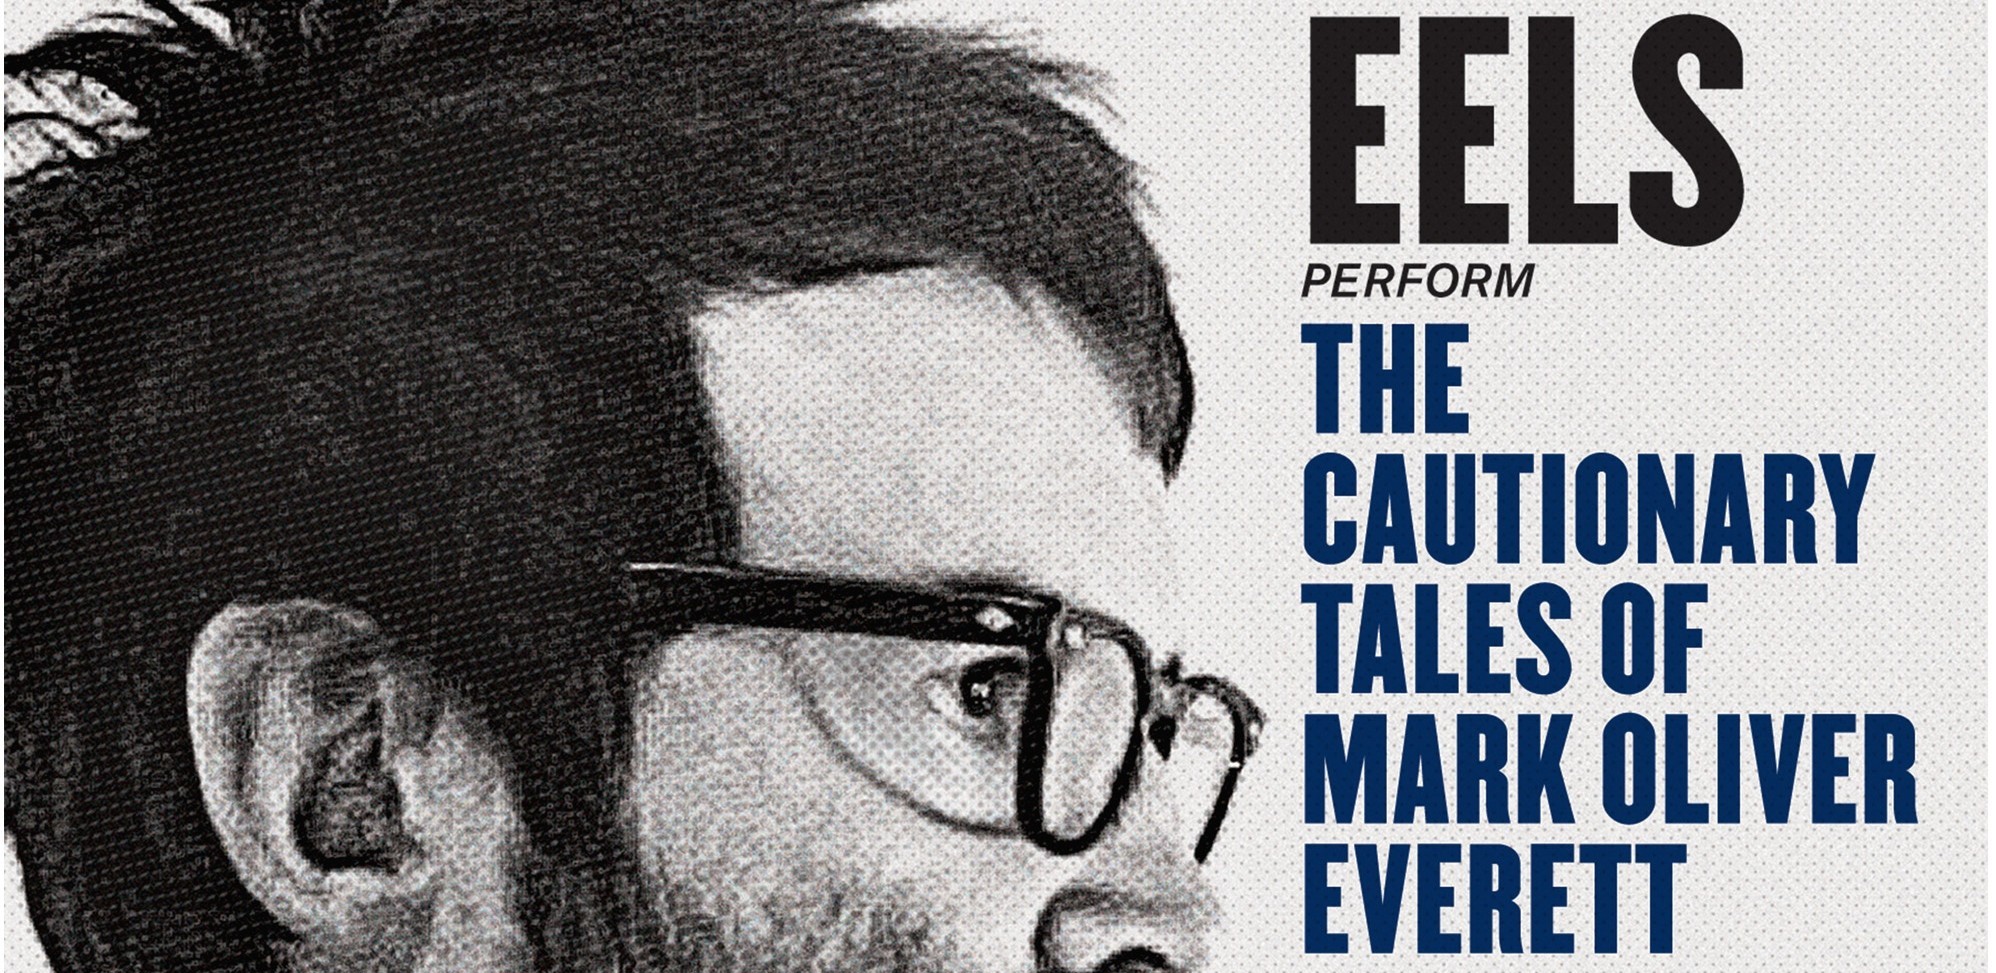 Die neue CD der Eels, "The cautionary tales of Mark Oliver Everett". Foto: PIAS